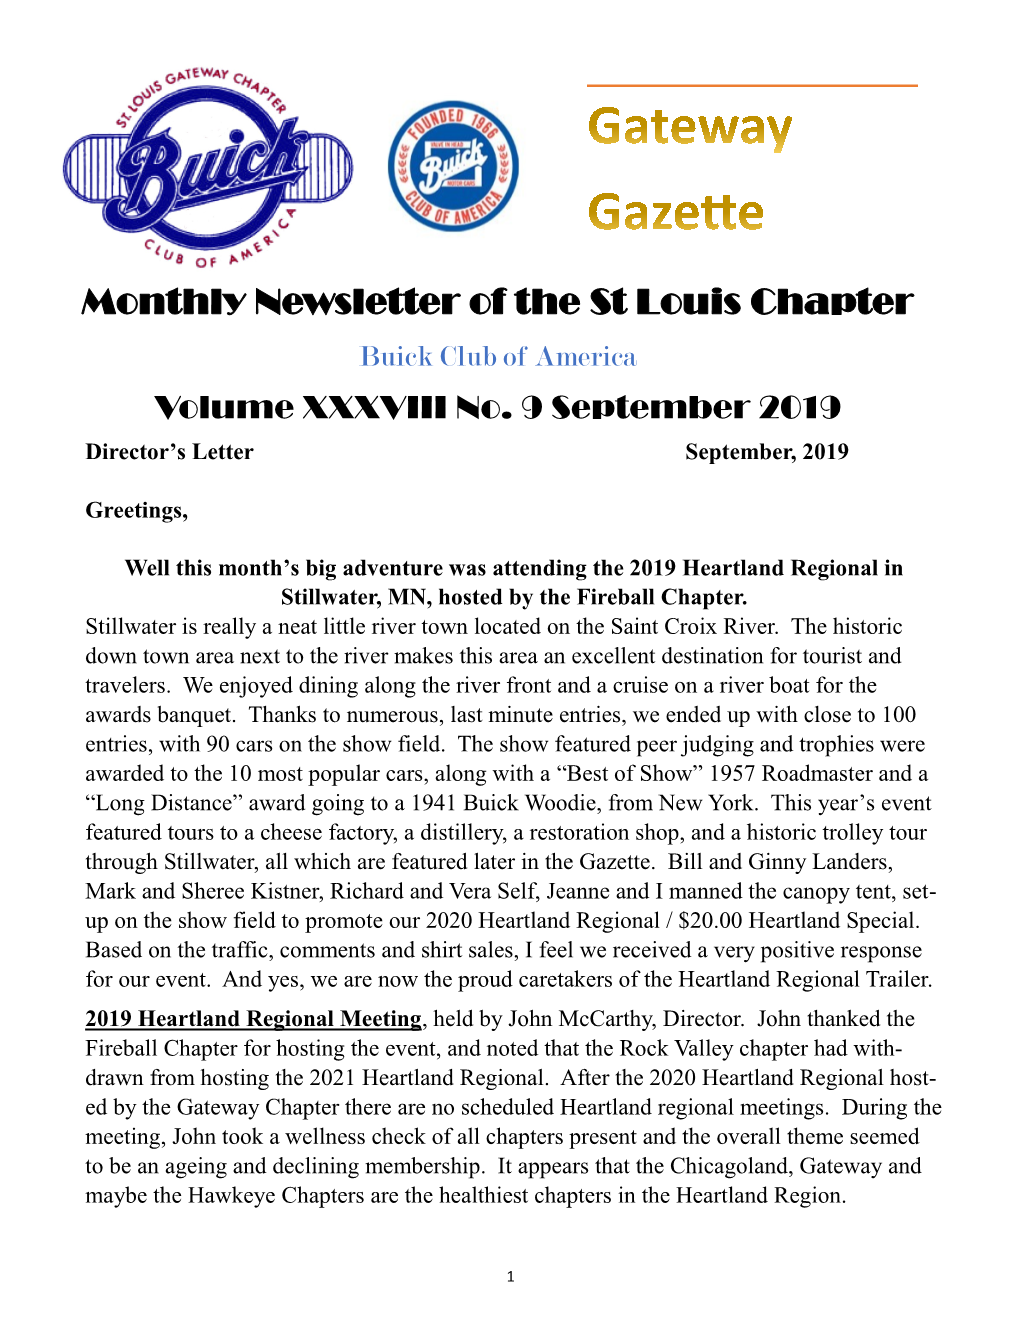 Monthly Newsletter of the St Louis Chapter Buick Club of America Volume XXXVIII No